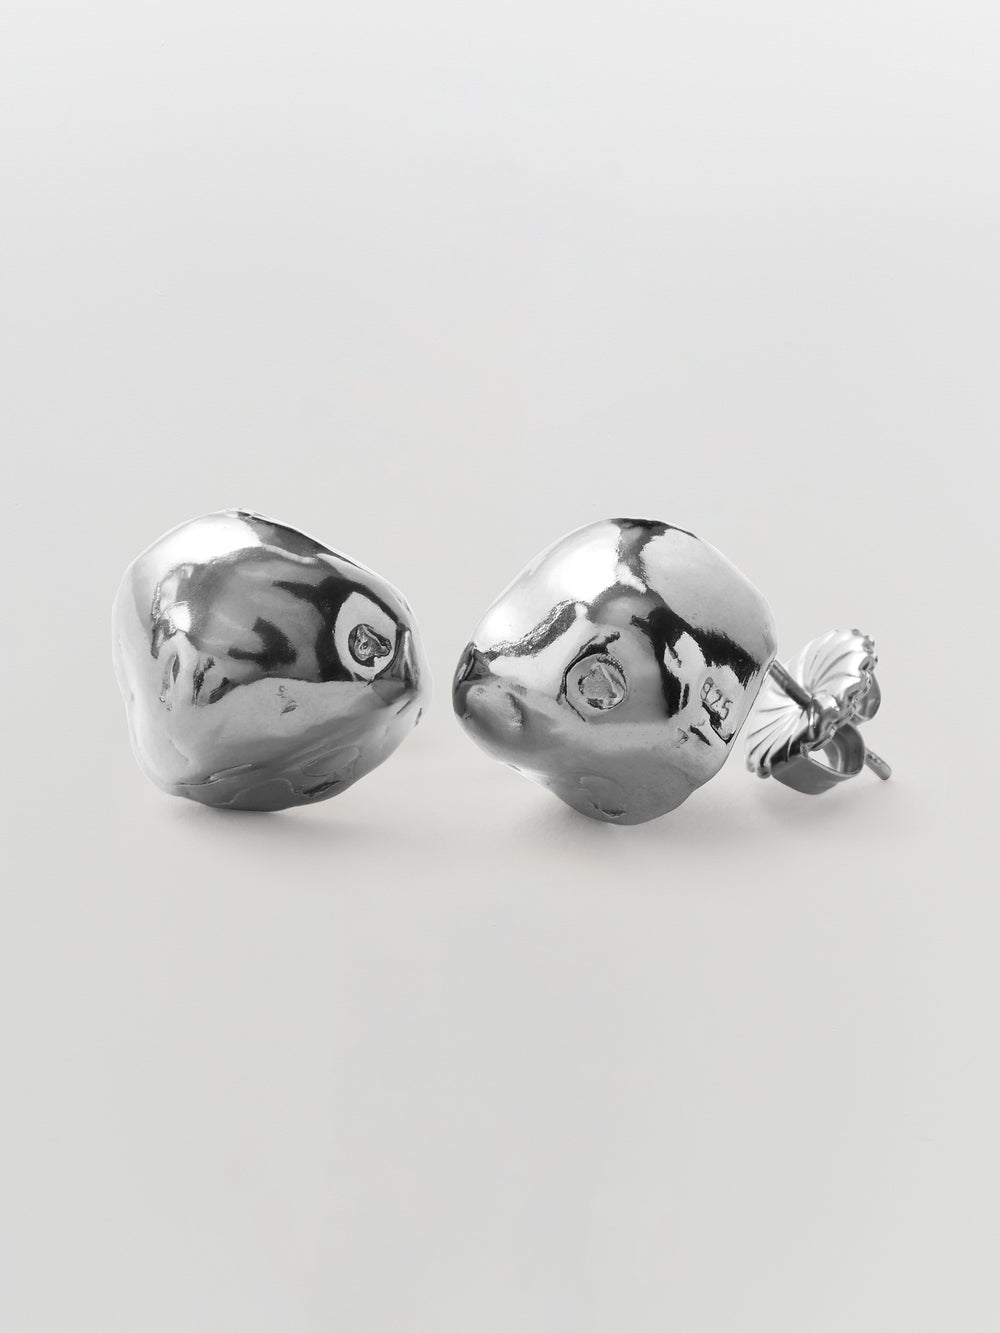 released from love cast pearl silver studs